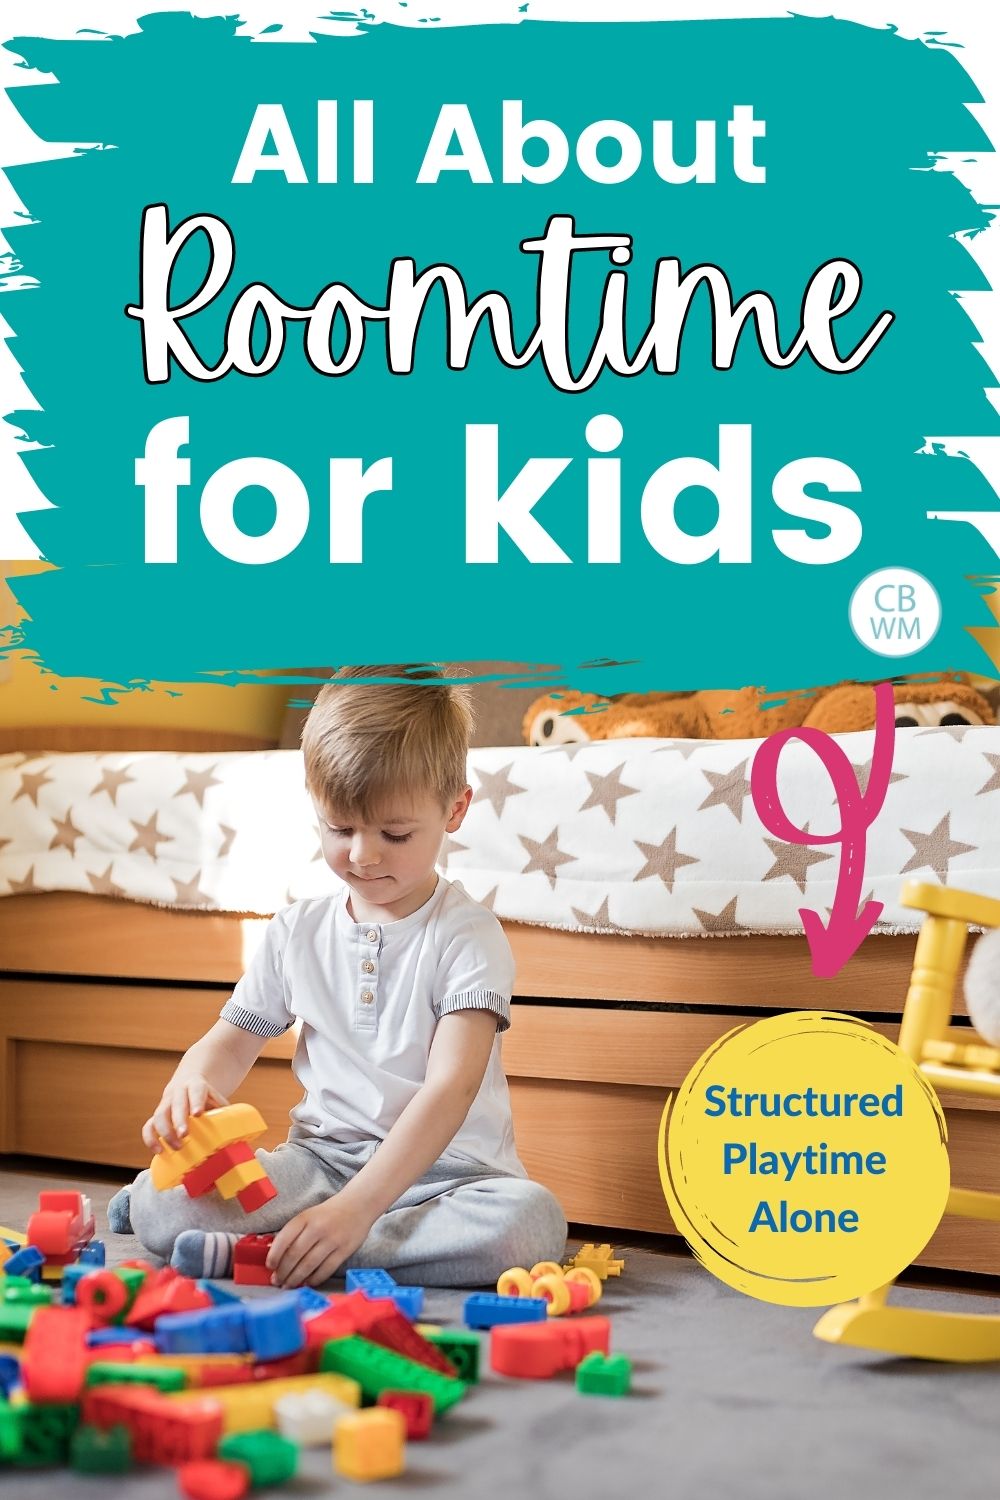 All about roomtime for kids